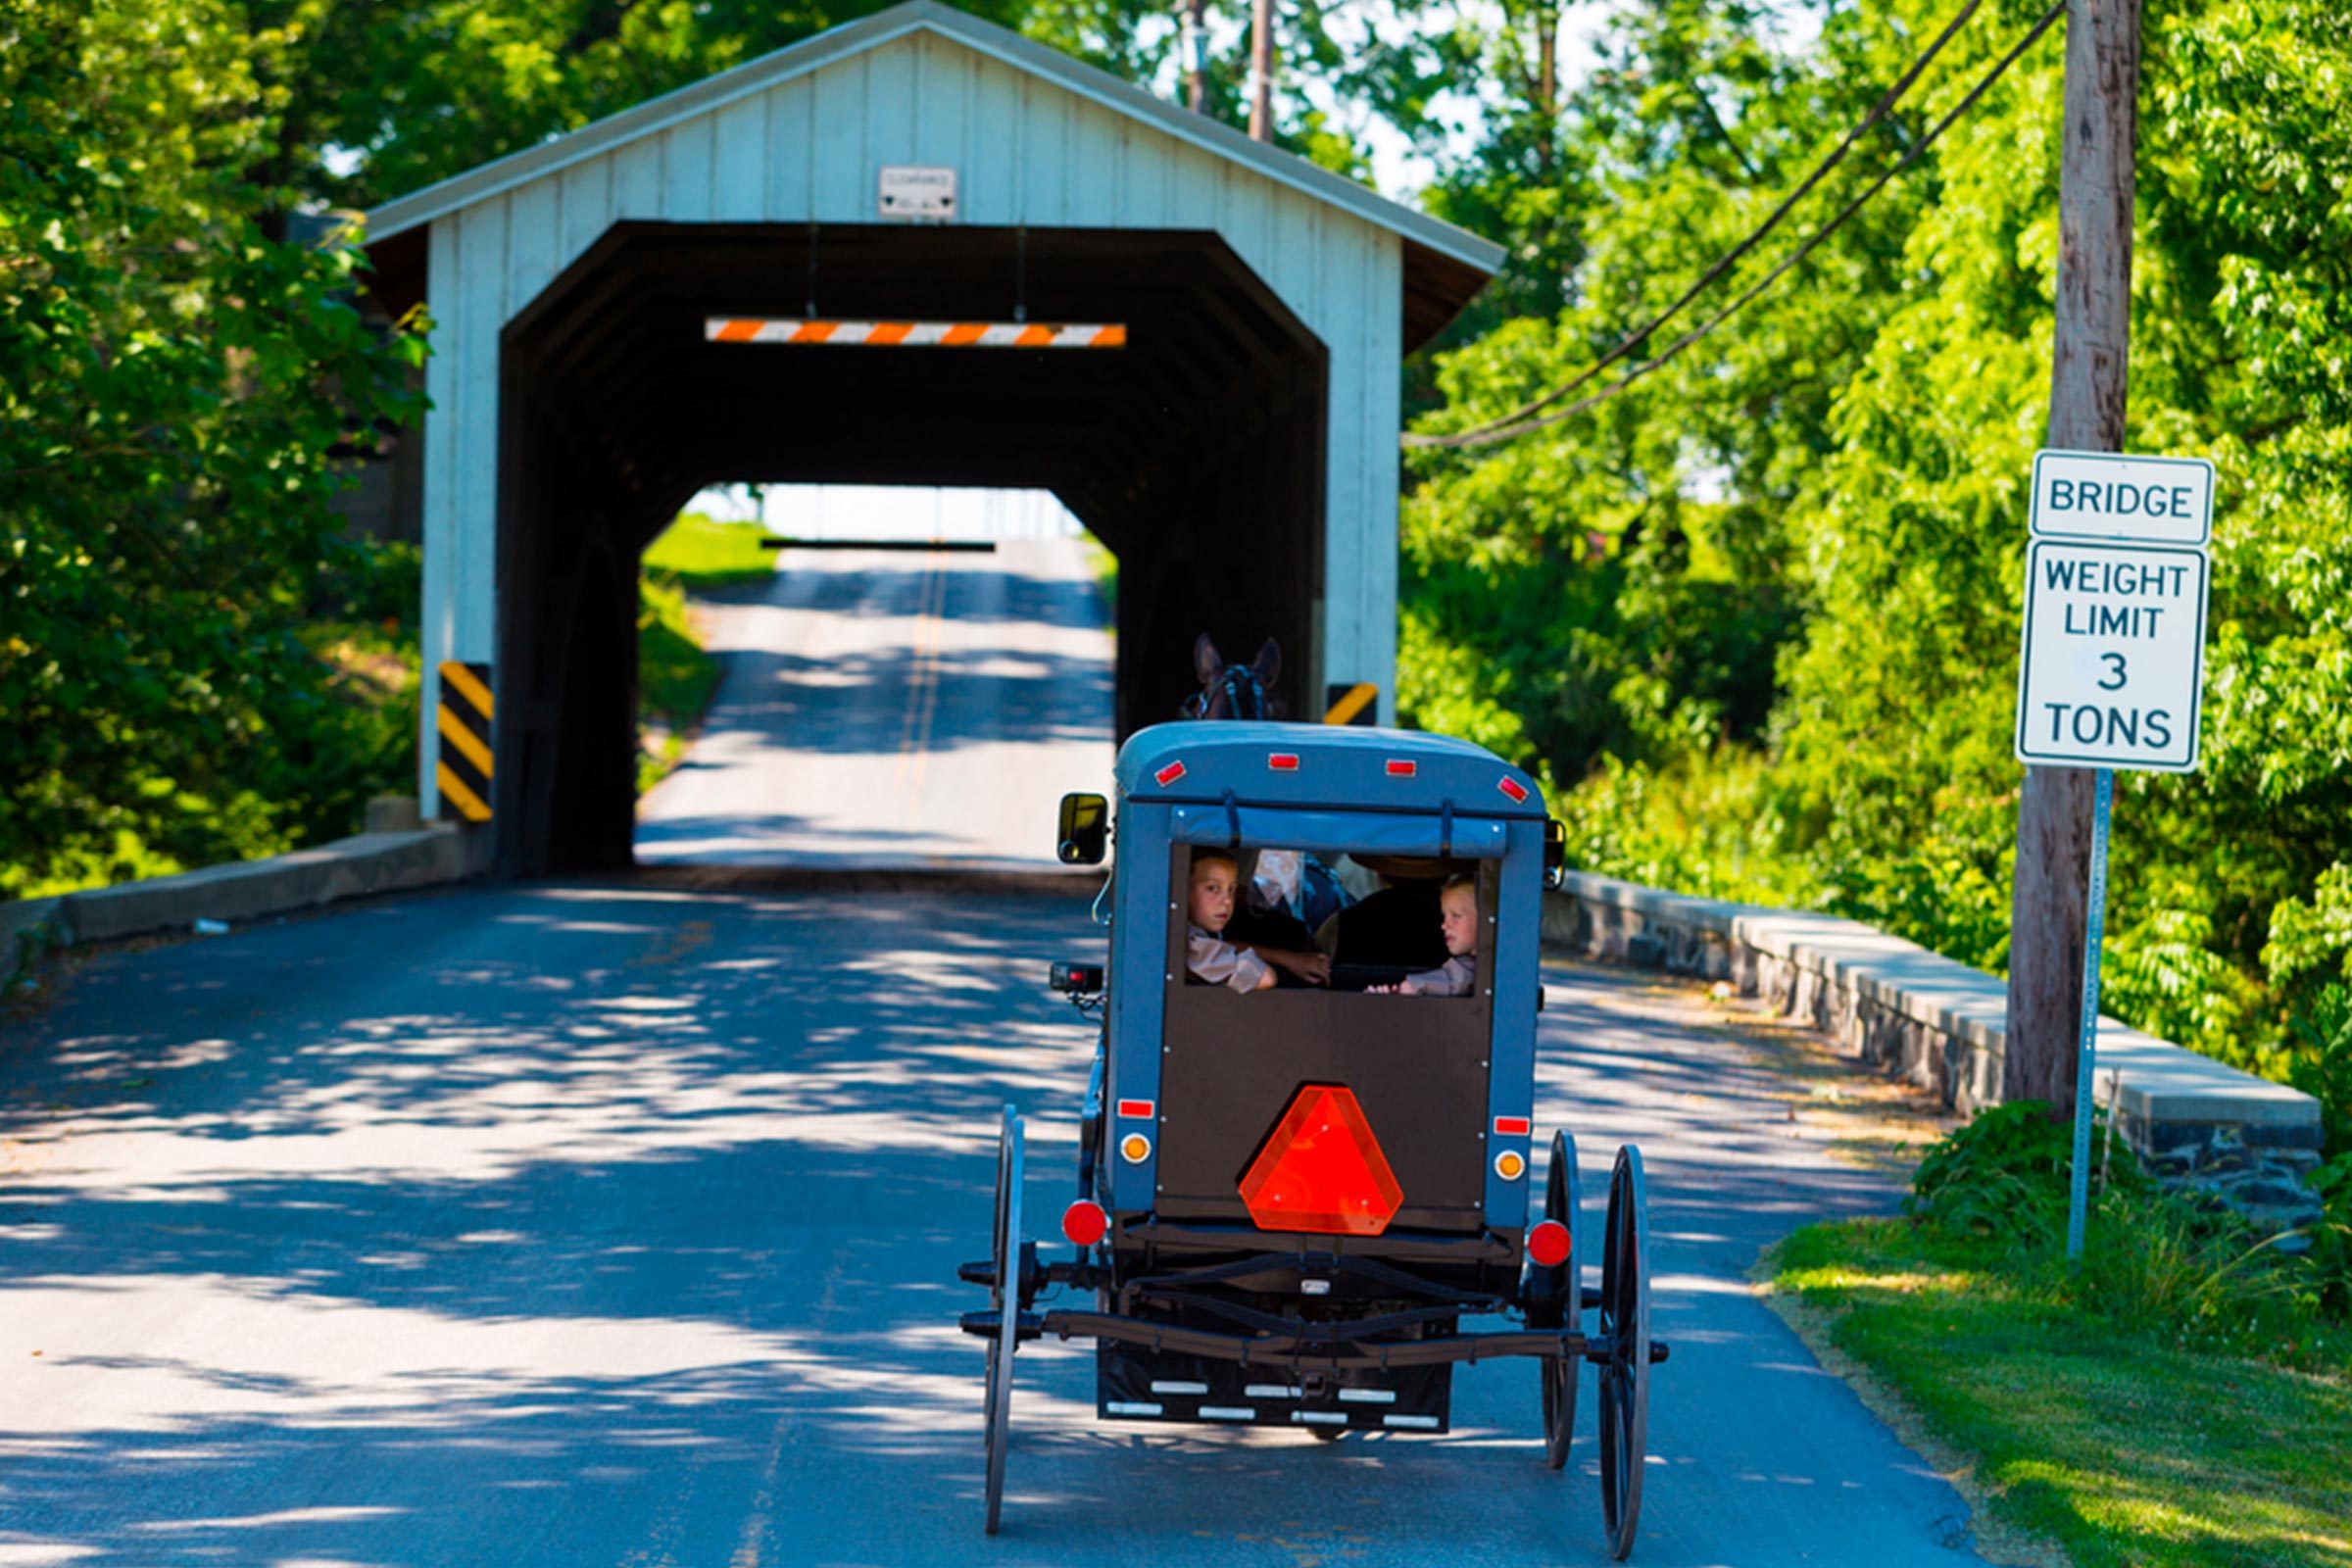 <p>The Pennsylvania Dutch Country refers to an area in the southeast part of the state that has traditionally been home to many Amish families. The Amish pursue a simpler way of life, and some families in and around <a href="https://www.tripadvisor.com/Tourism-g53403-Paradise_Lancaster_County_Pennsylvania-Vacations.html" rel="noopener">Paradise</a> open their doors to outsiders with bed-and-breakfasts and community and farm tours. Bear in mind, however, that most traditional Amish families eschew electricity and photography and don't welcome visitors into their homes. But the ones that do provide a wonderful, authentic-feeling experience and food like you've probably never tasted!</p> <p class="listicle-page__cta-button-shop"><a class="shop-btn" href="https://www.tripadvisor.com/Tourism-g53403-Paradise_Lancaster_County_Pennsylvania-Vacations.html">Learn More</a></p>